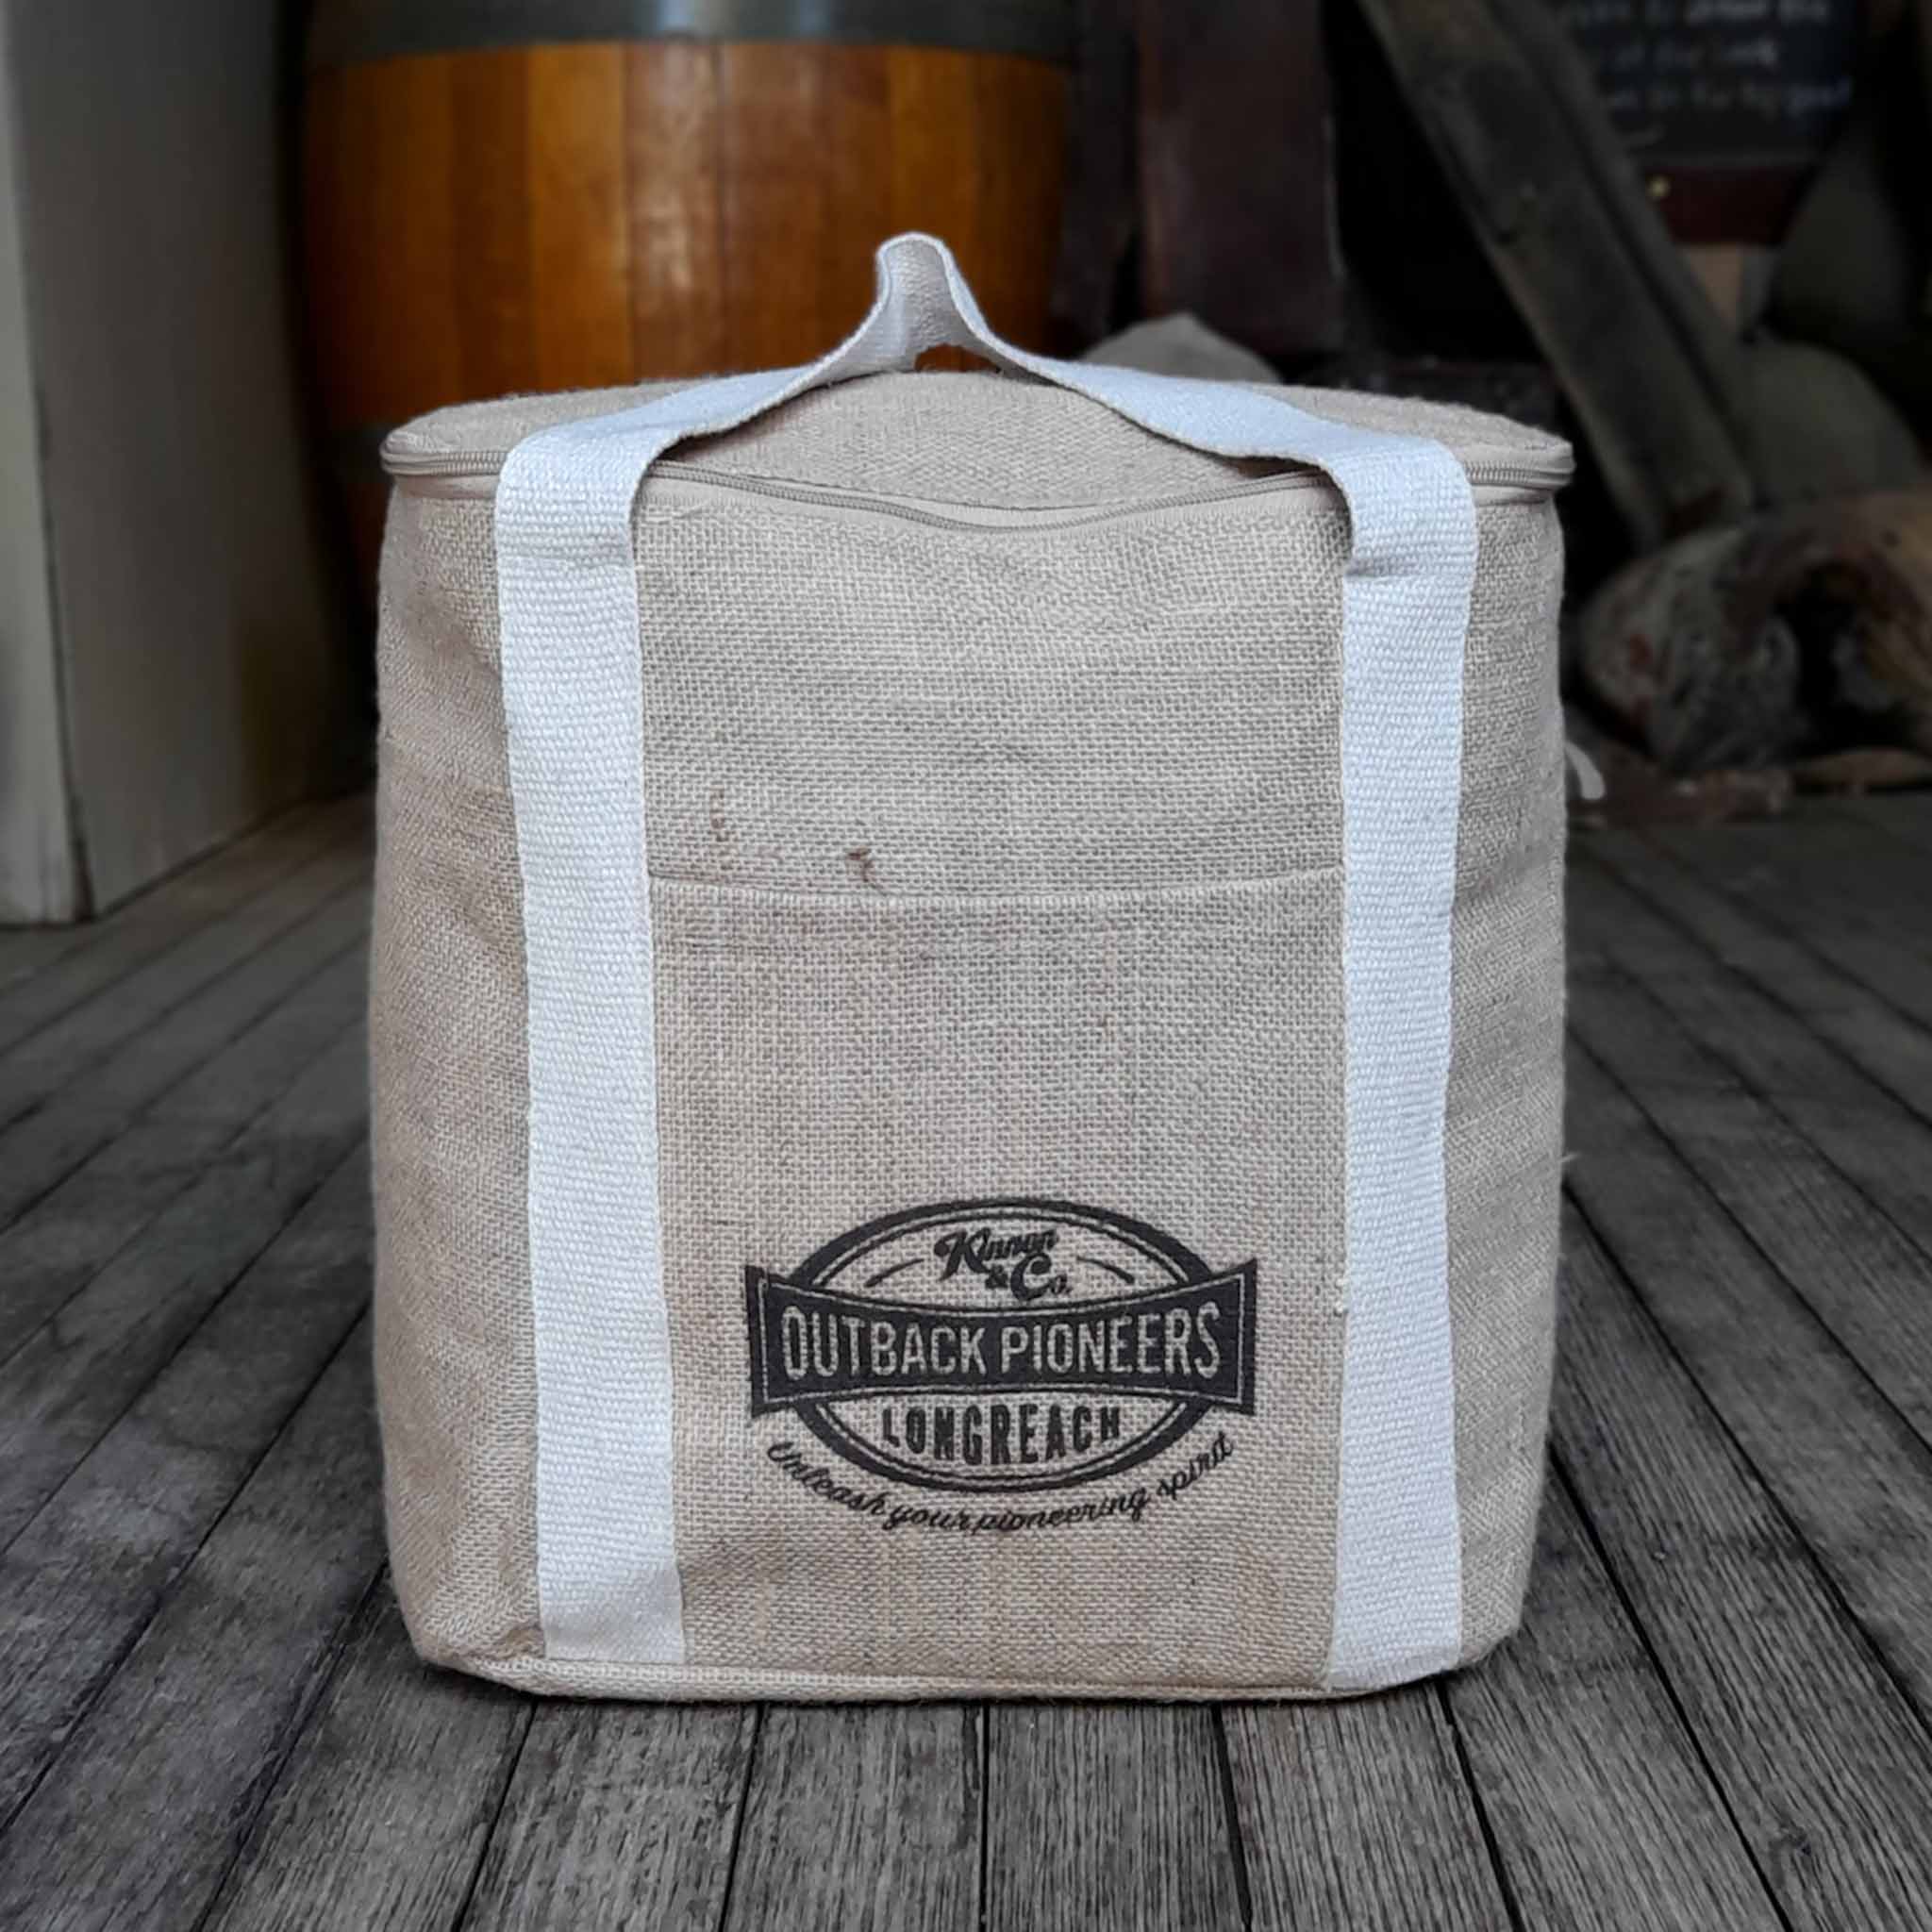 Outback Pioneers branded Jute Cooler bag with cotton handles